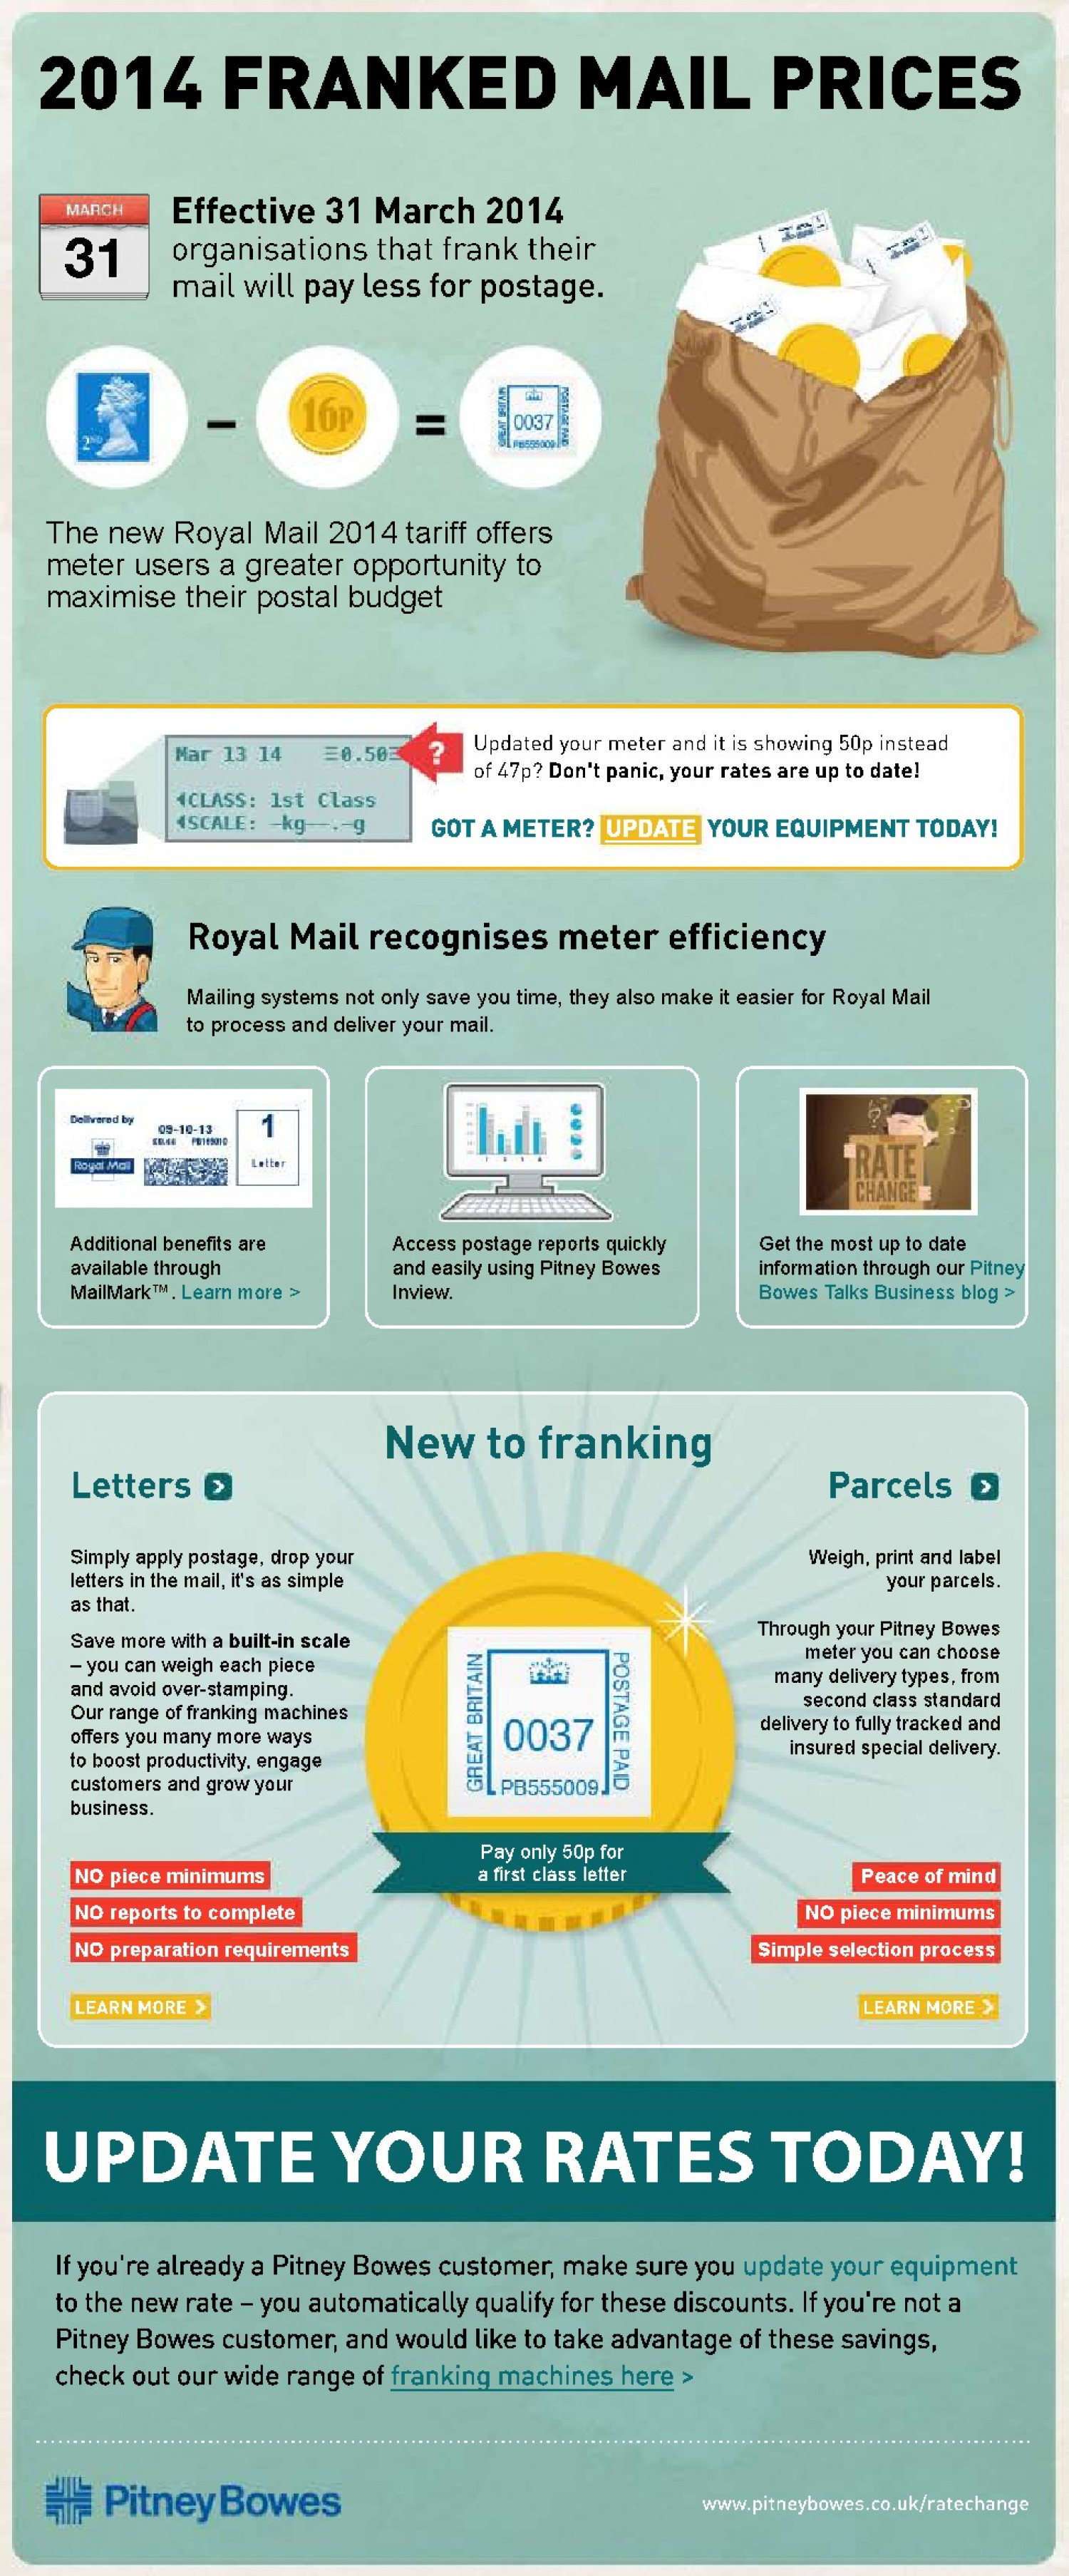 2014 Franked Mail Prices Infographic